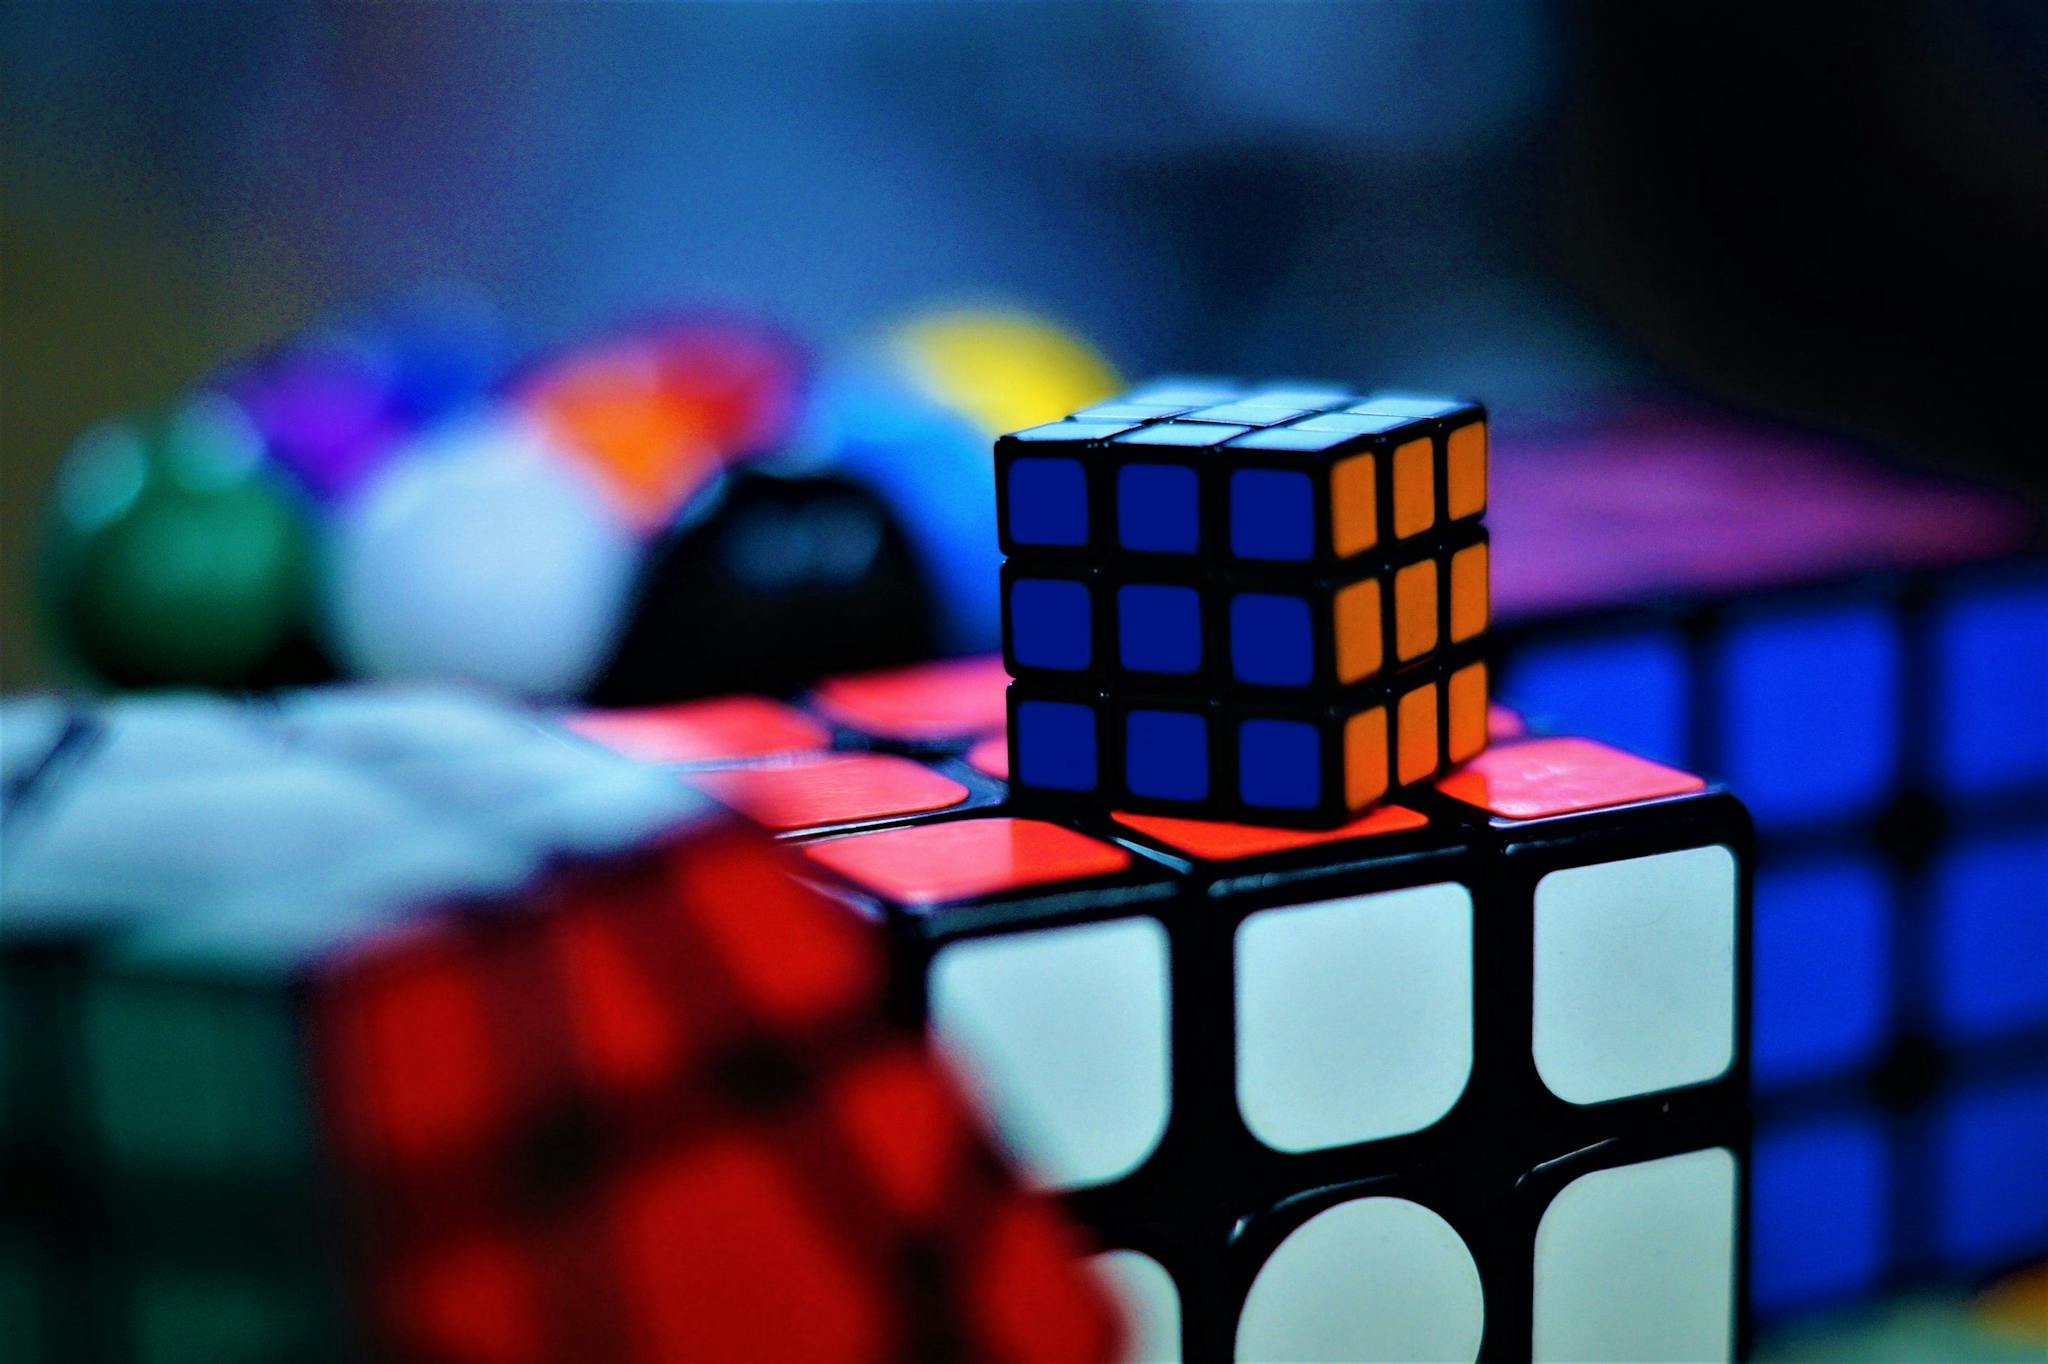 A stack of Rubik's cubes